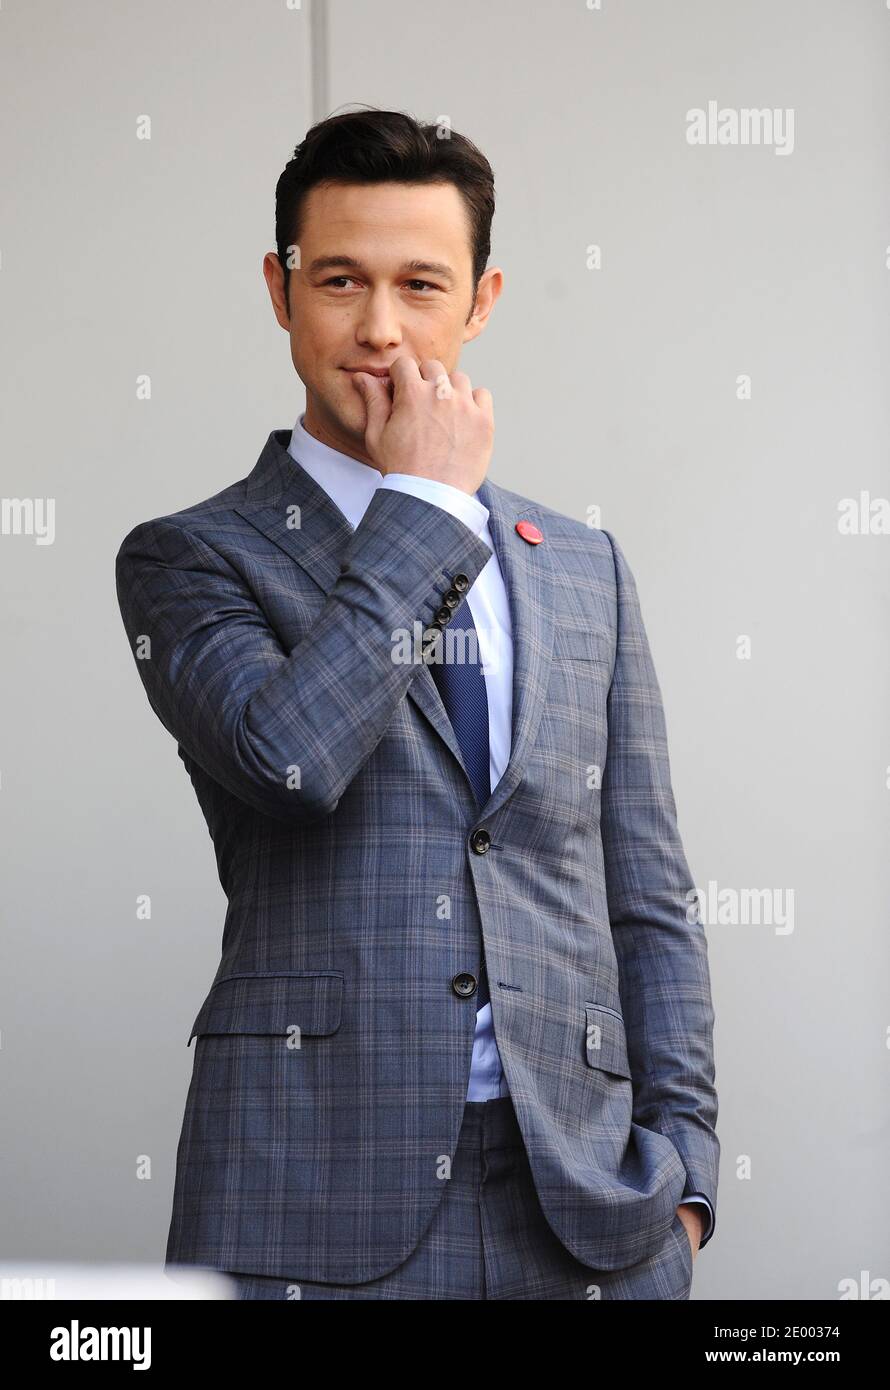 Joseph Gordon Levitt attends the ceremony honoring Julianne Moore with a star on the Hollywood Walk of Fame in Los Angeles, CA, USA, on October 3, 2013. Photo by Lionel Hahn/ABACAPRESS.COM Stock Photo